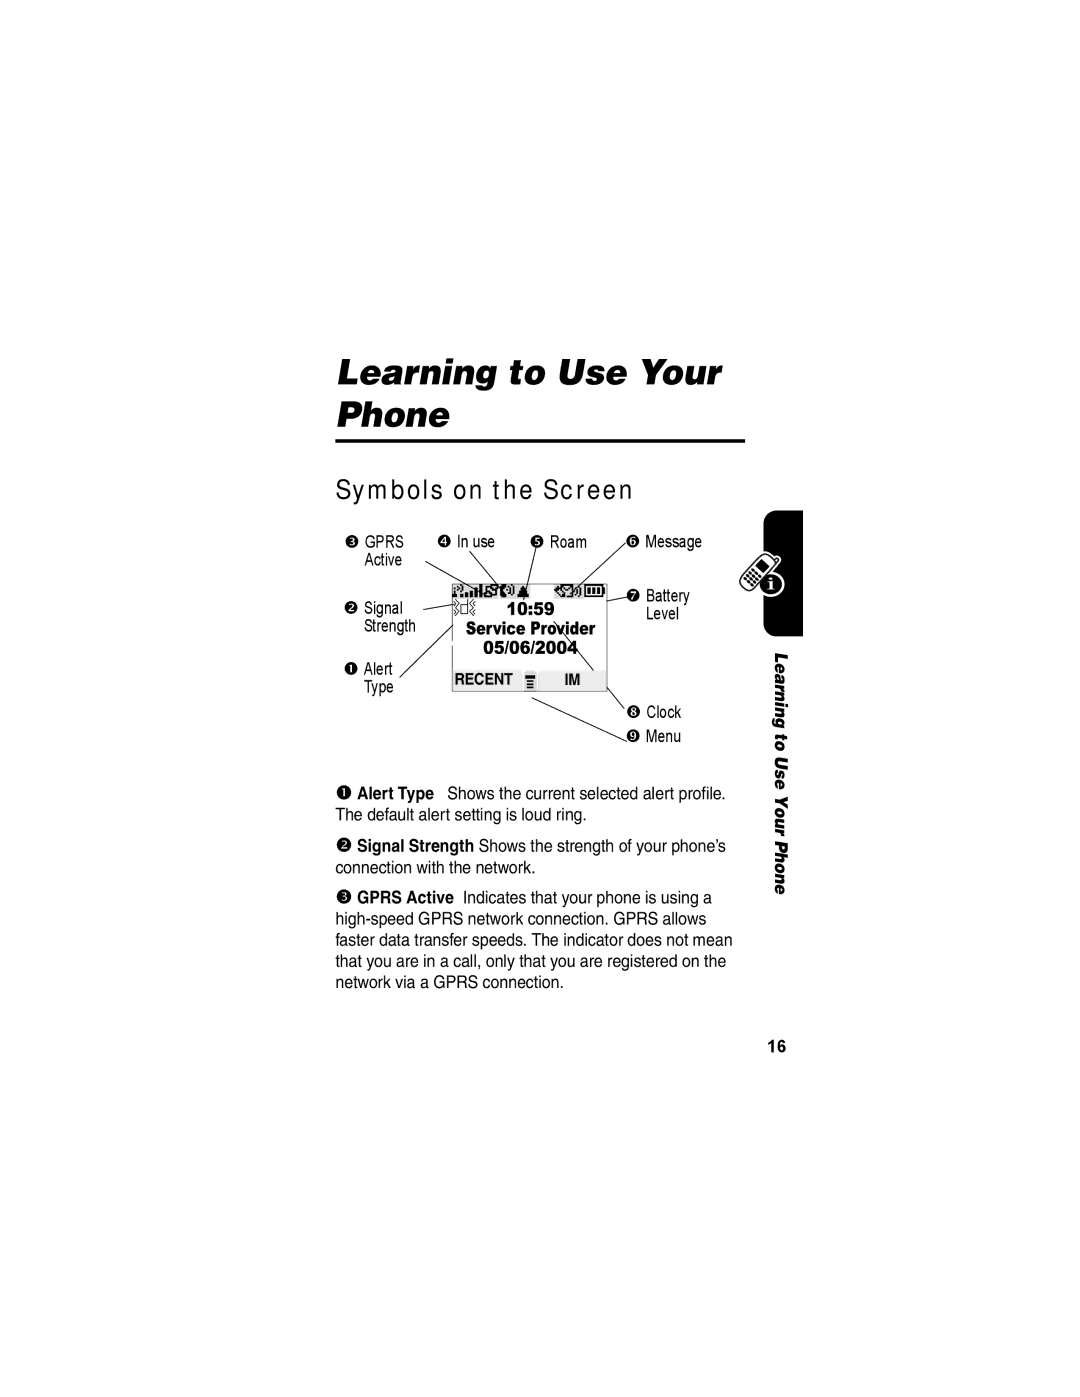 Motorola V173 manual Learning to Use Your Phone, Symbols on the Screen 